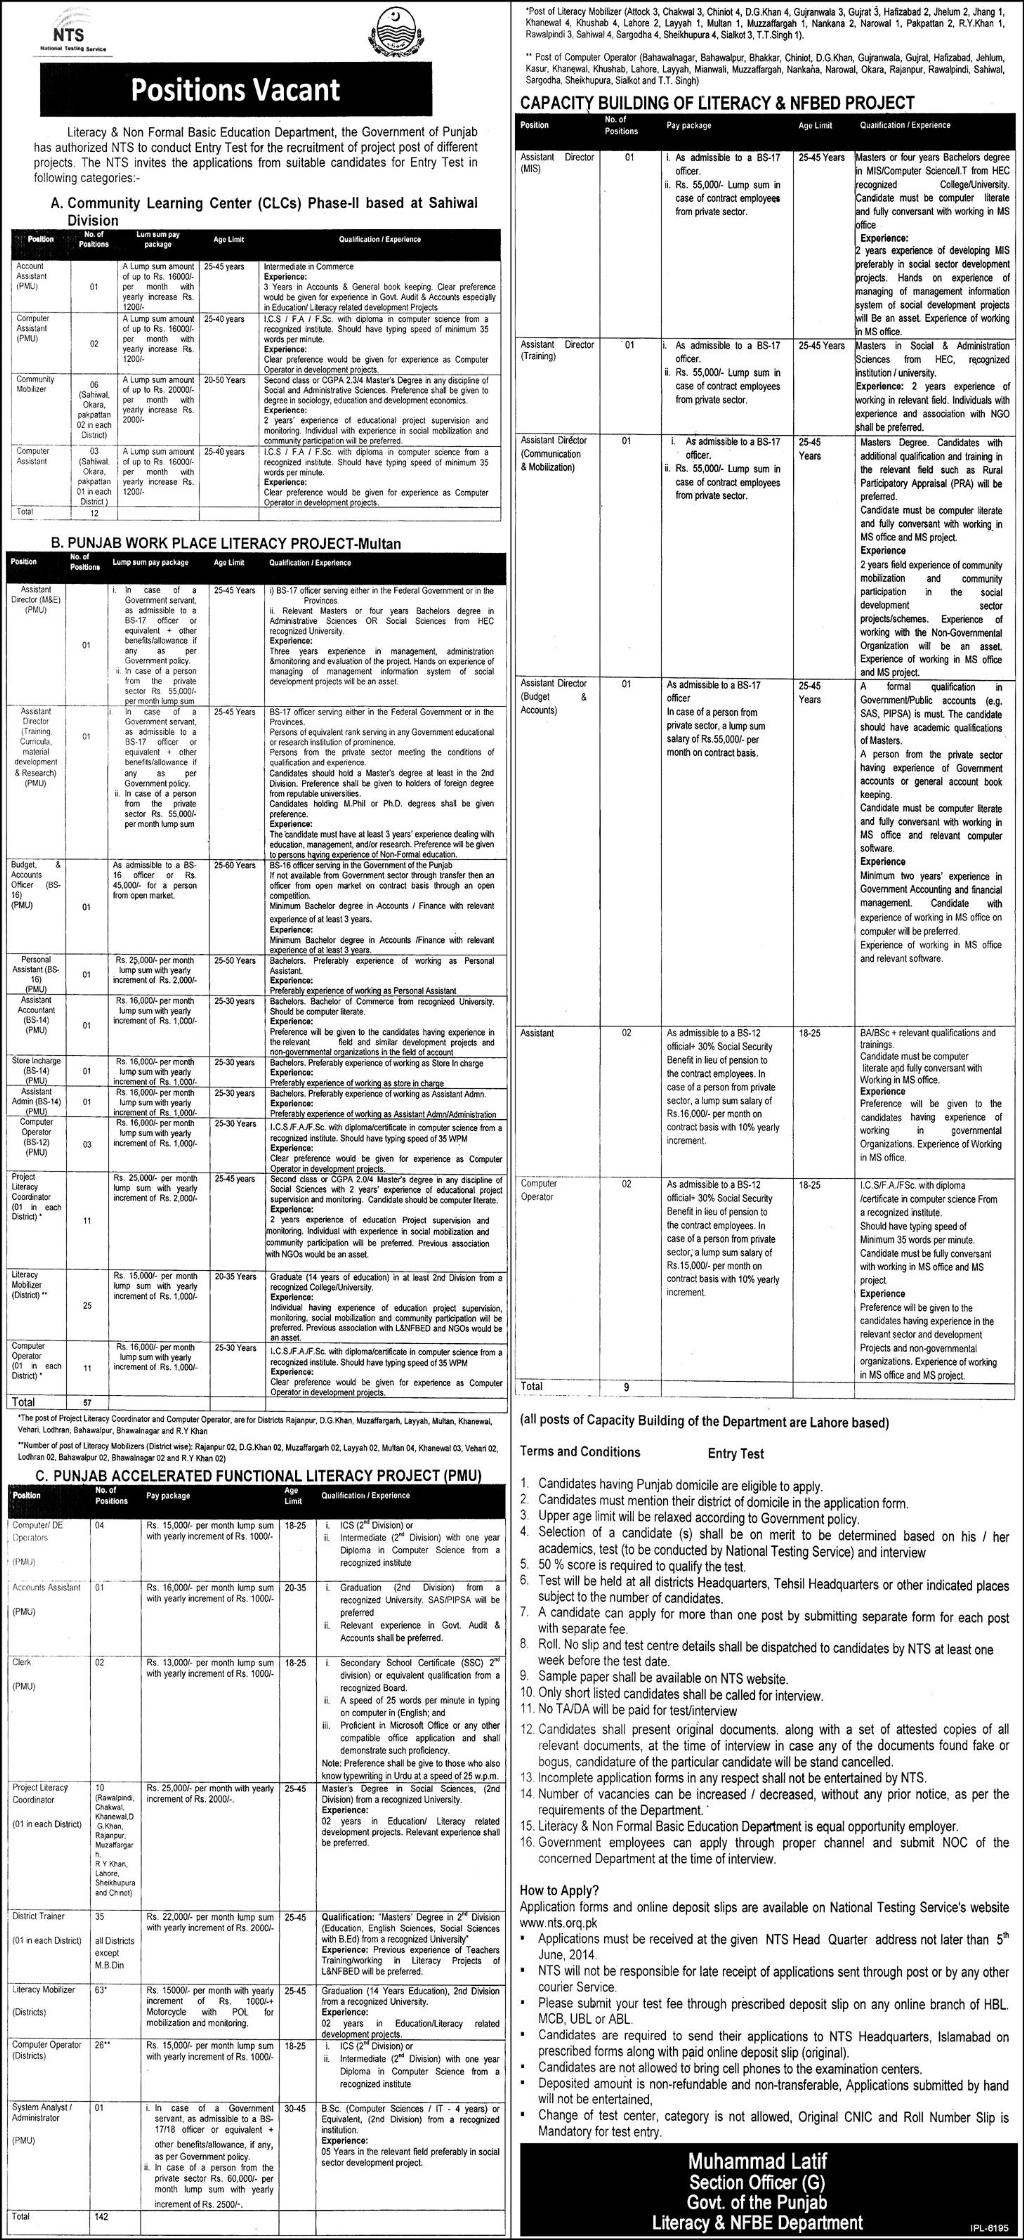 Literacy & Non Formal Basic Education Department Punjab Jobs 2014 May through NTS Entry Test